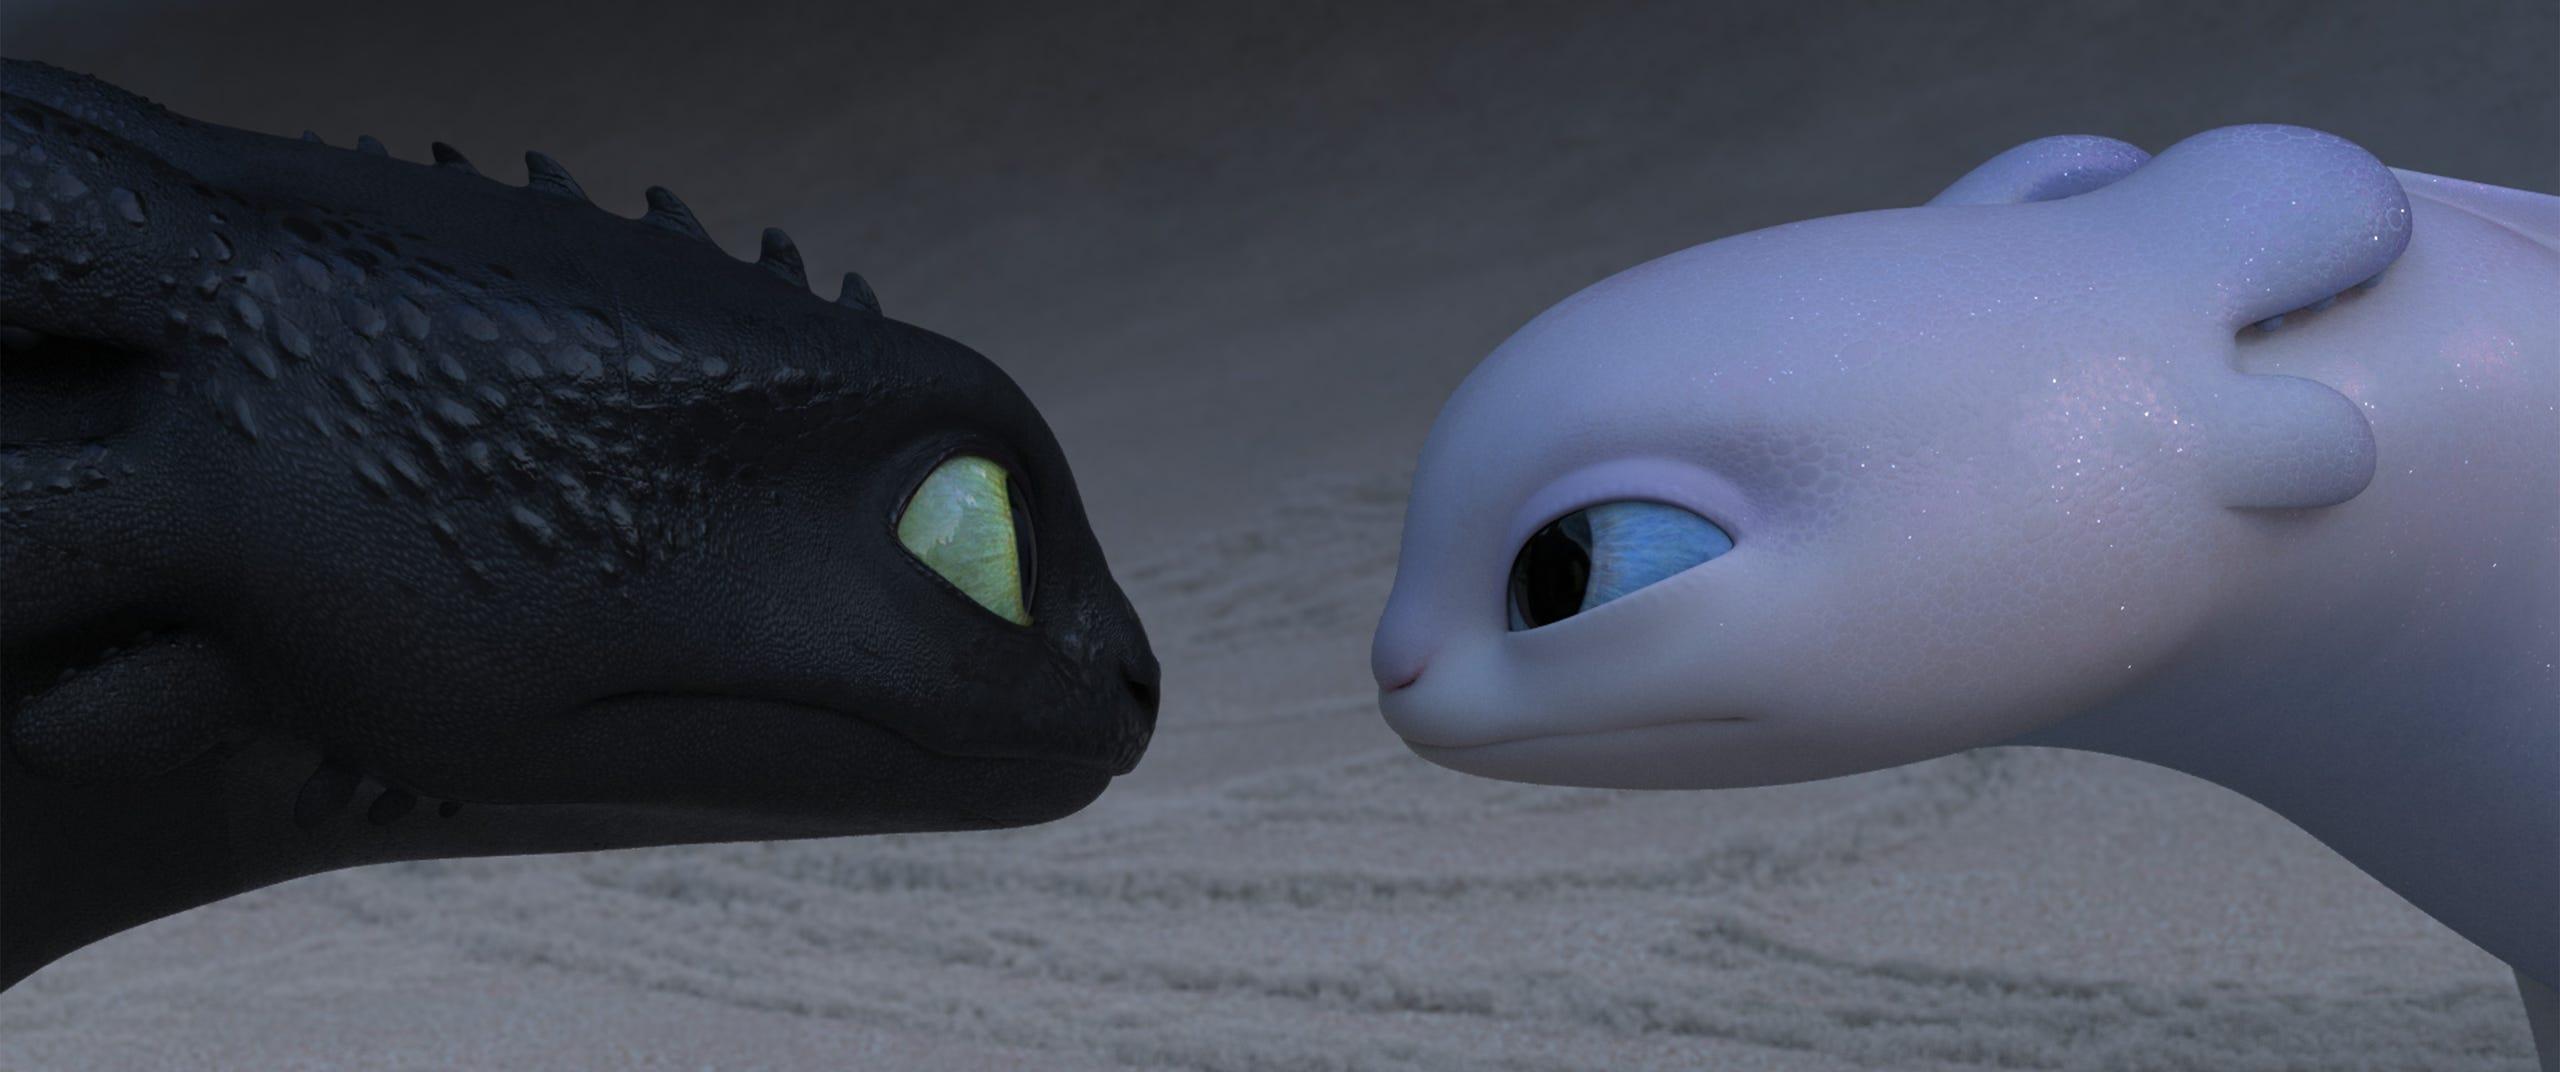 Light Fury brings heat to 'How to Train Your Dragon